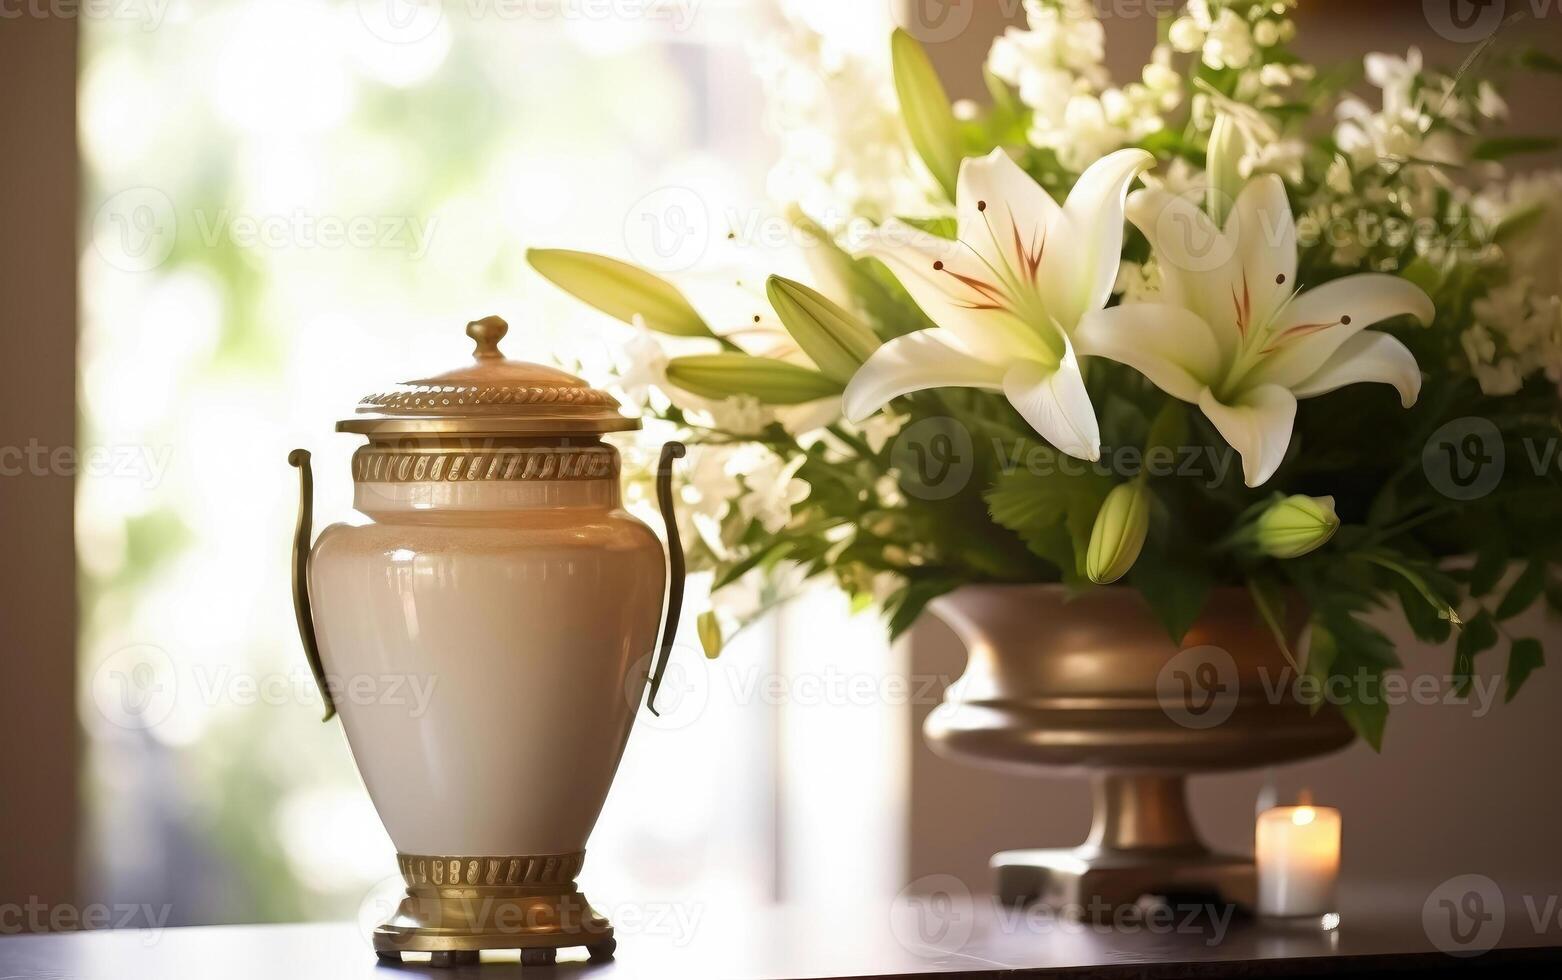 Sunlit Memorial - Funeral Urn and White Lilies Bouquet photo